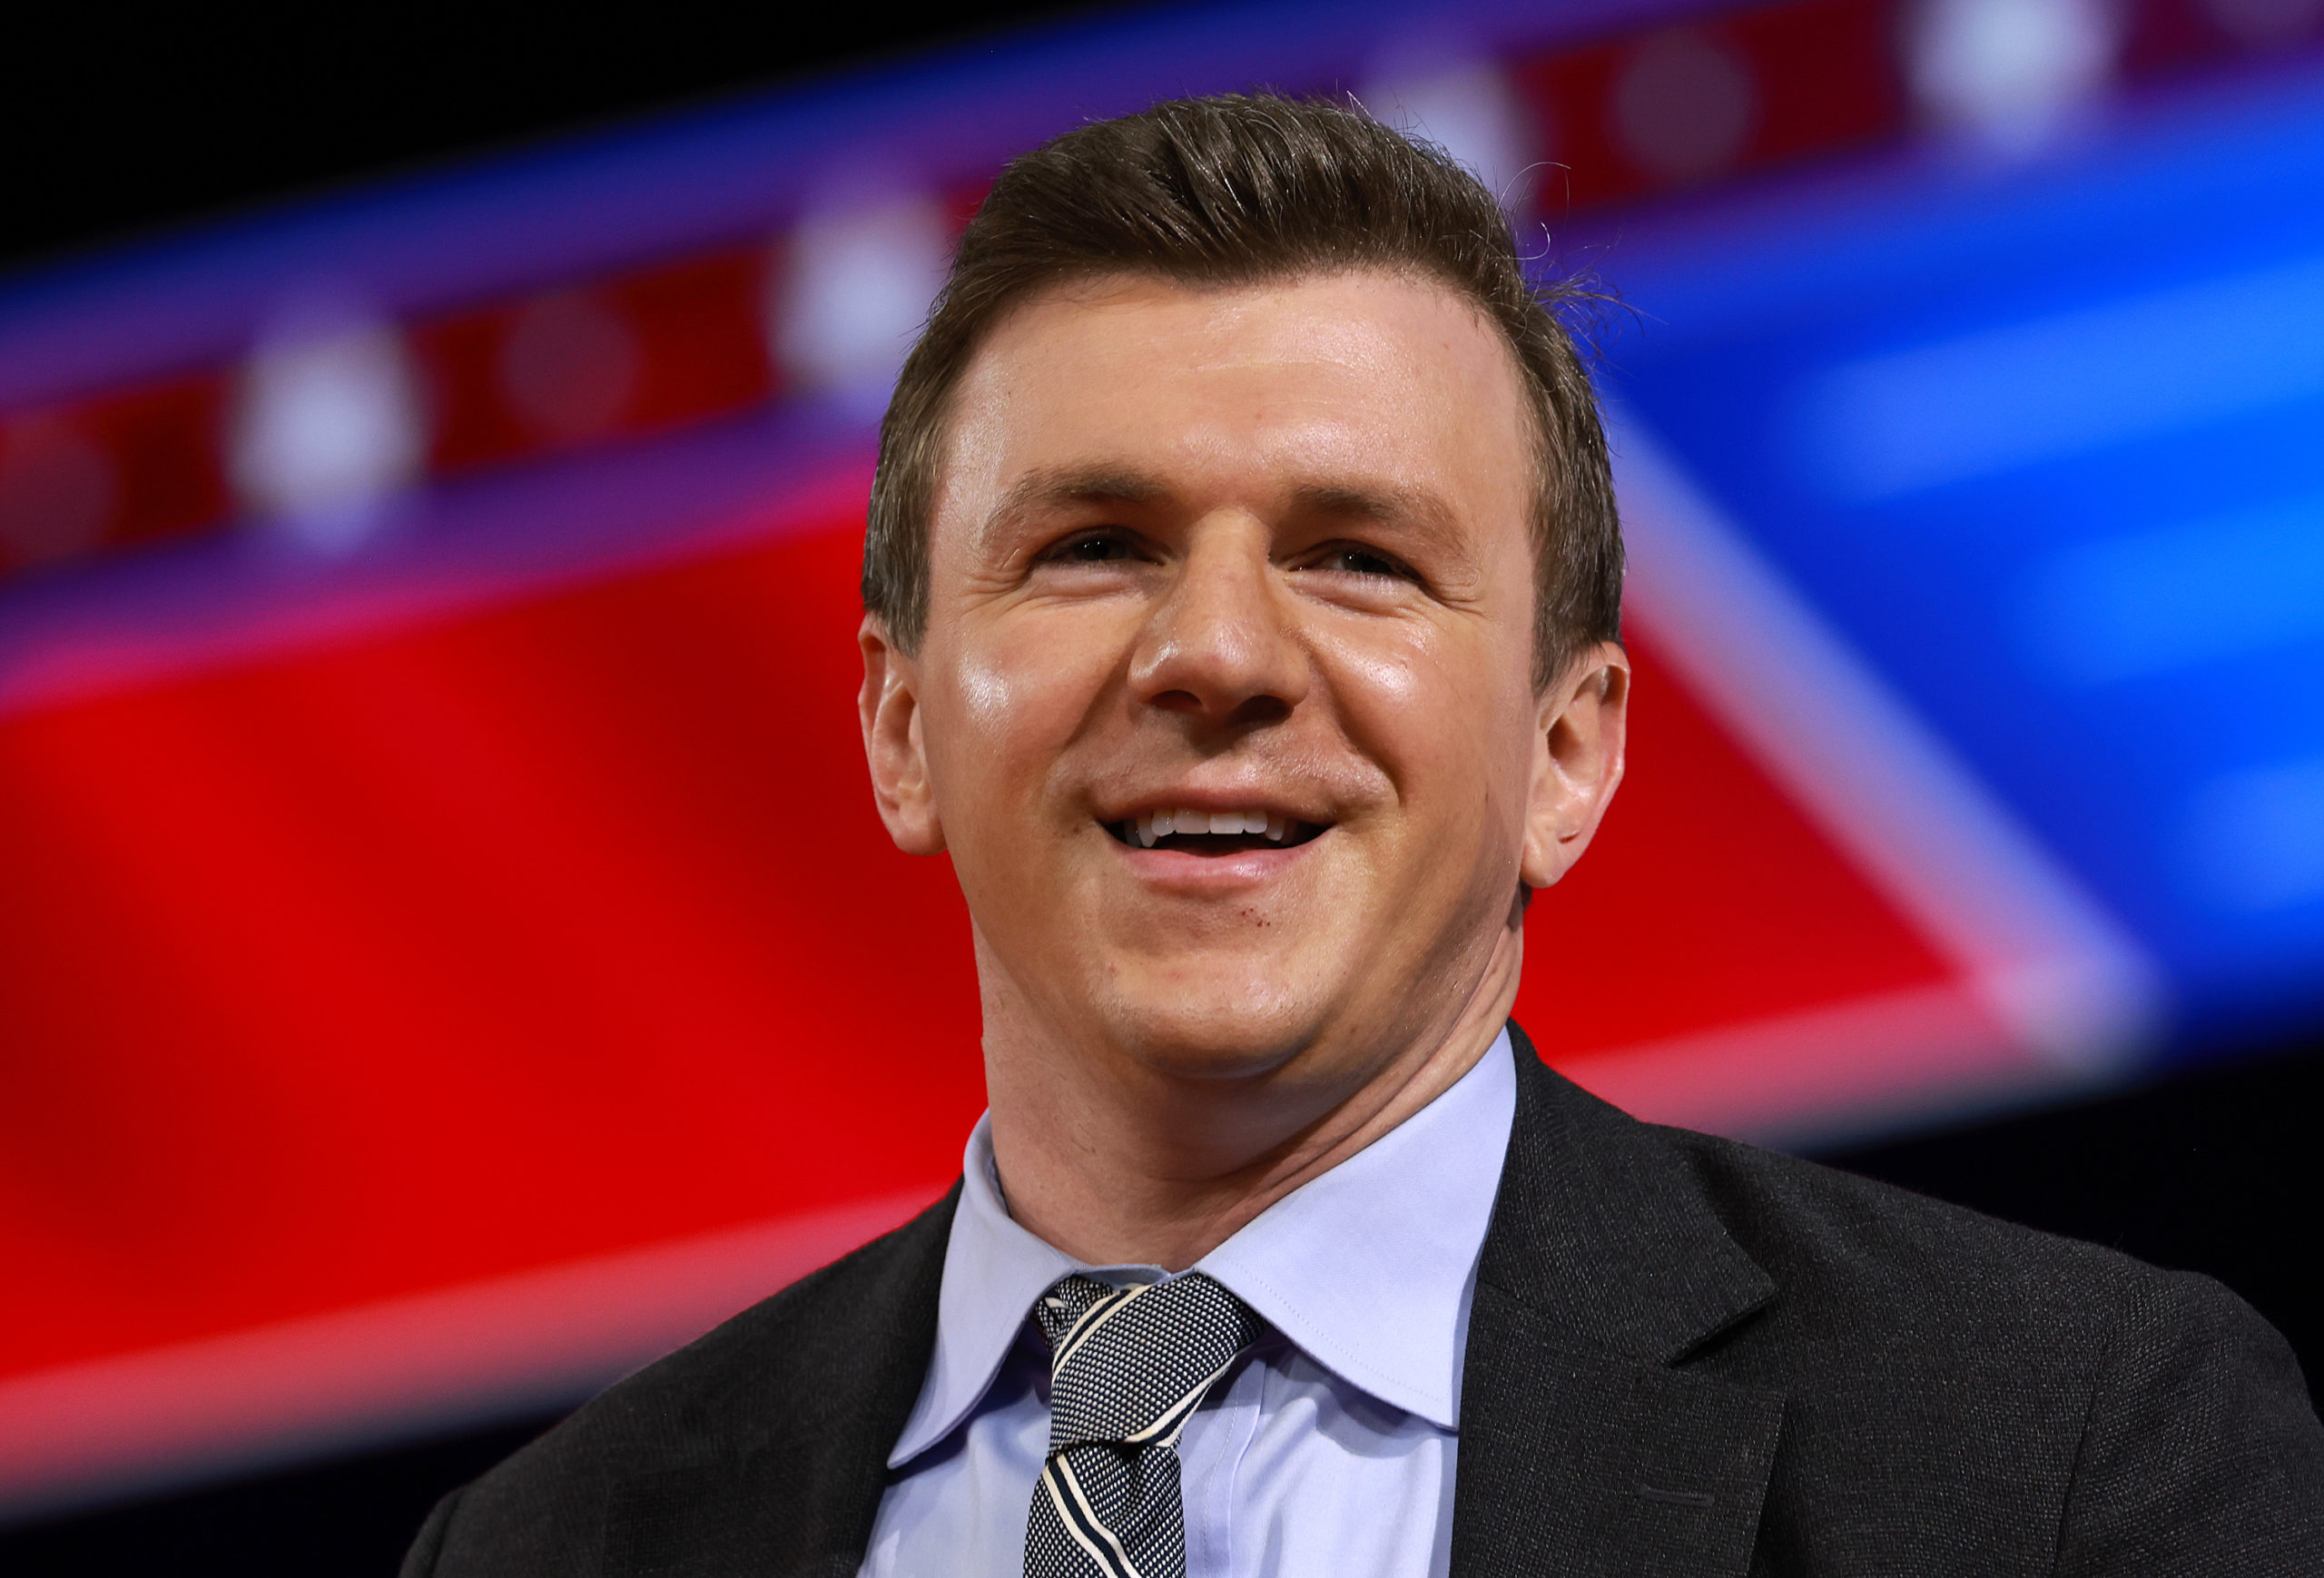 James O’Keefe, president of Project Veritas, has been reinstated on Twitter after more than a year and a half.